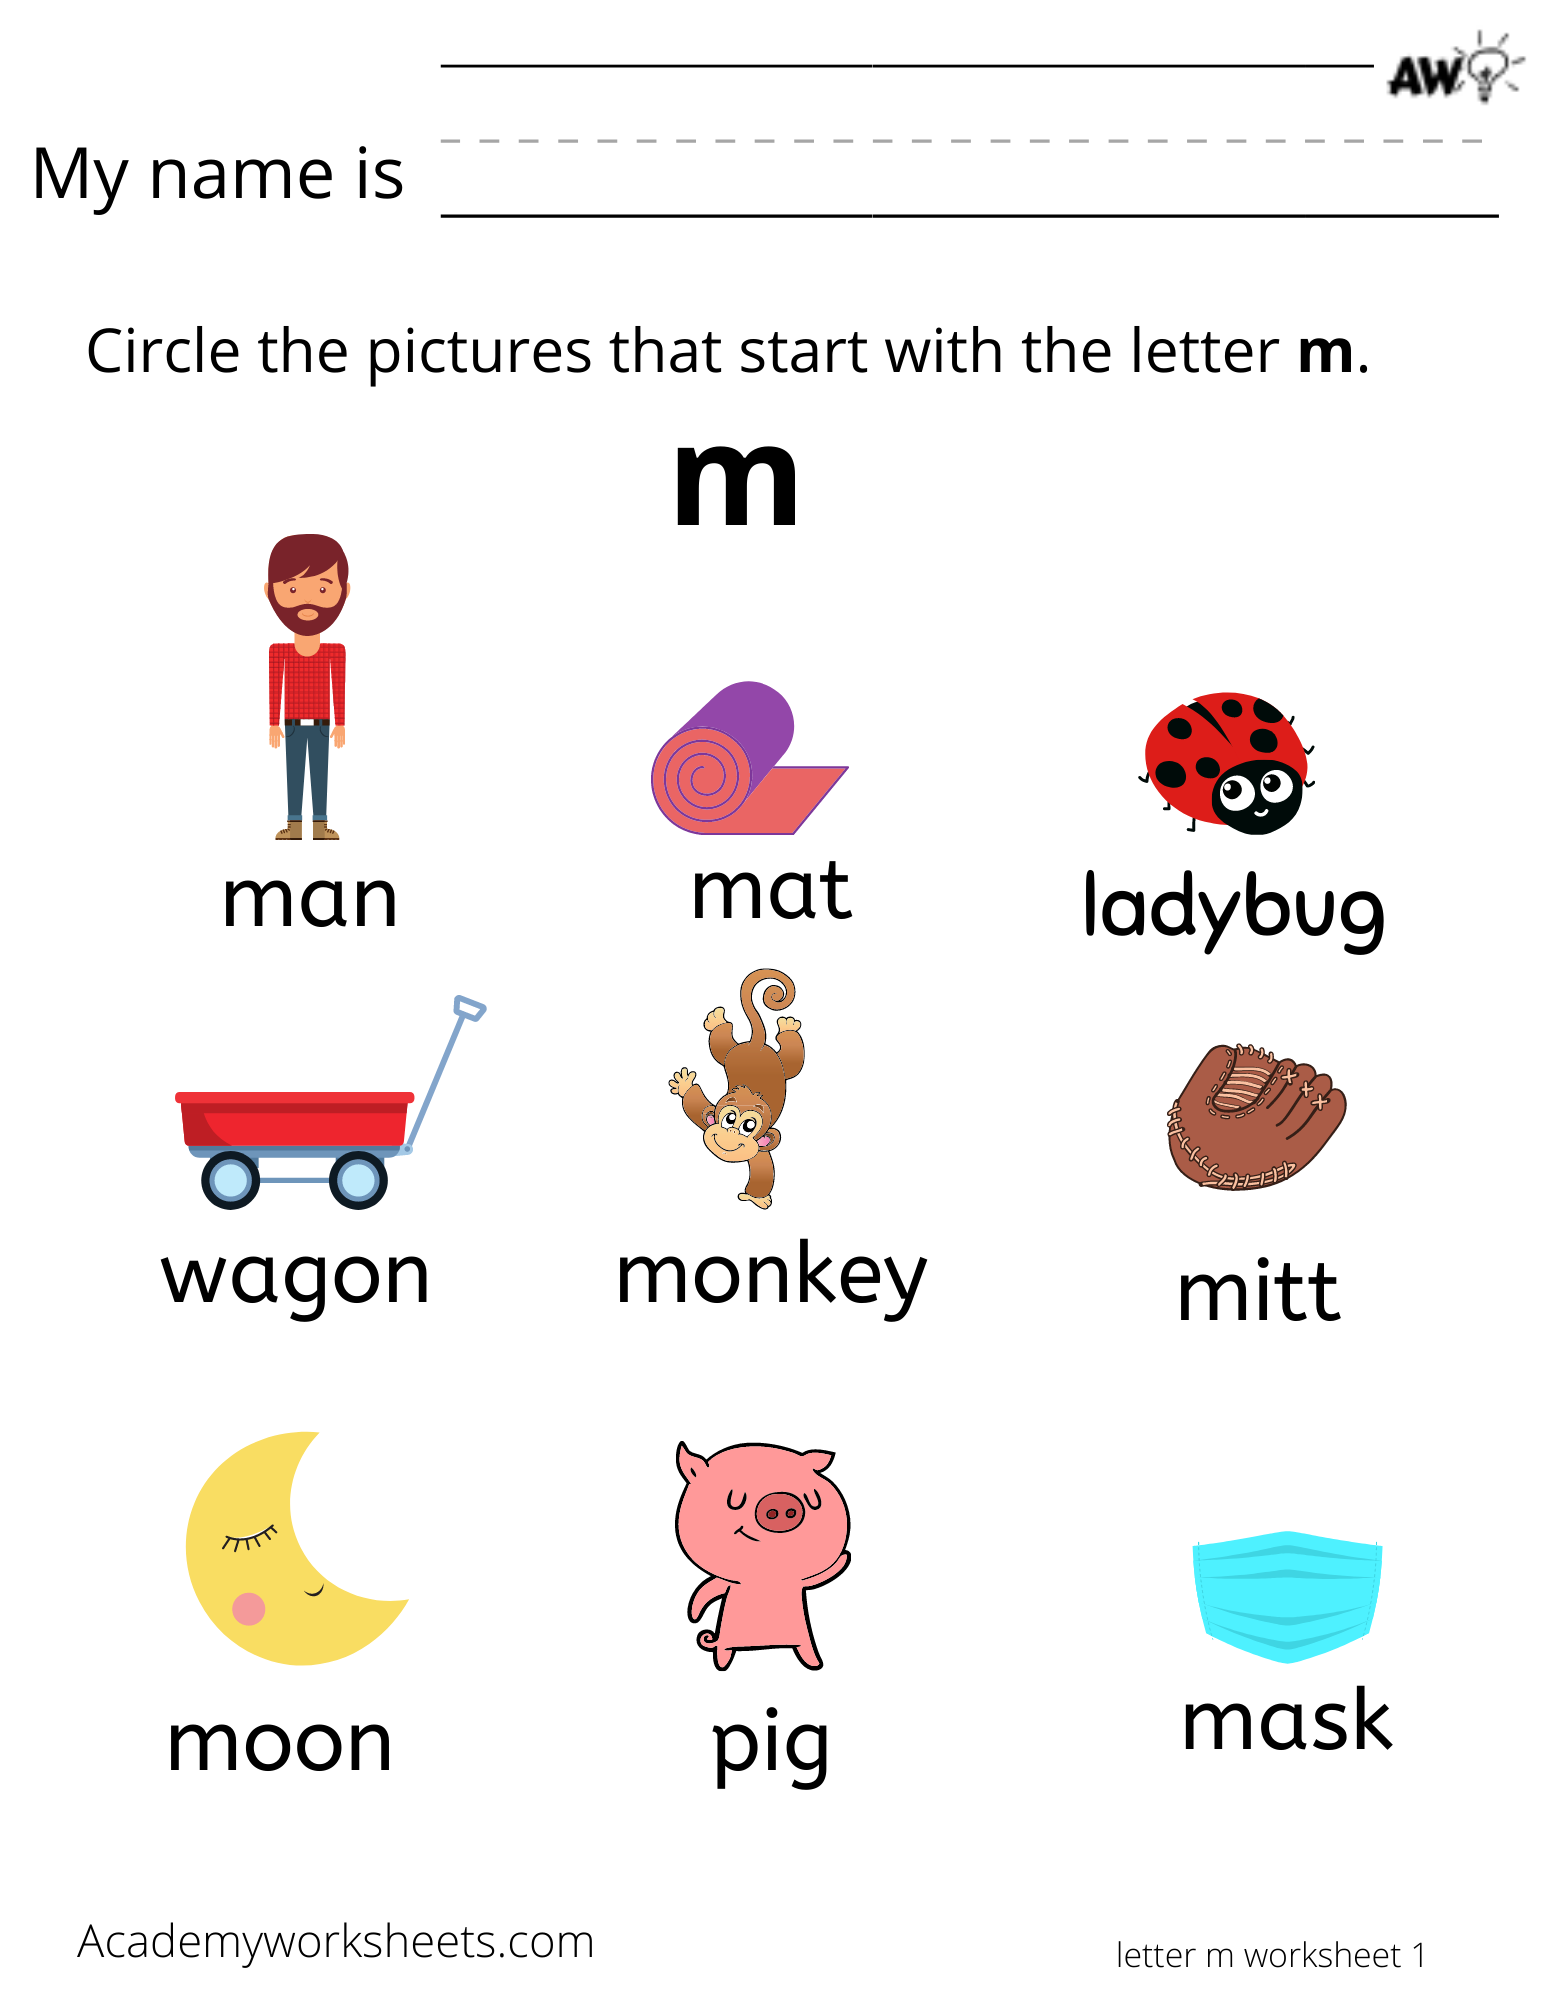 learn-the-letter-m-m-learning-the-alphabet-academy-worksheets